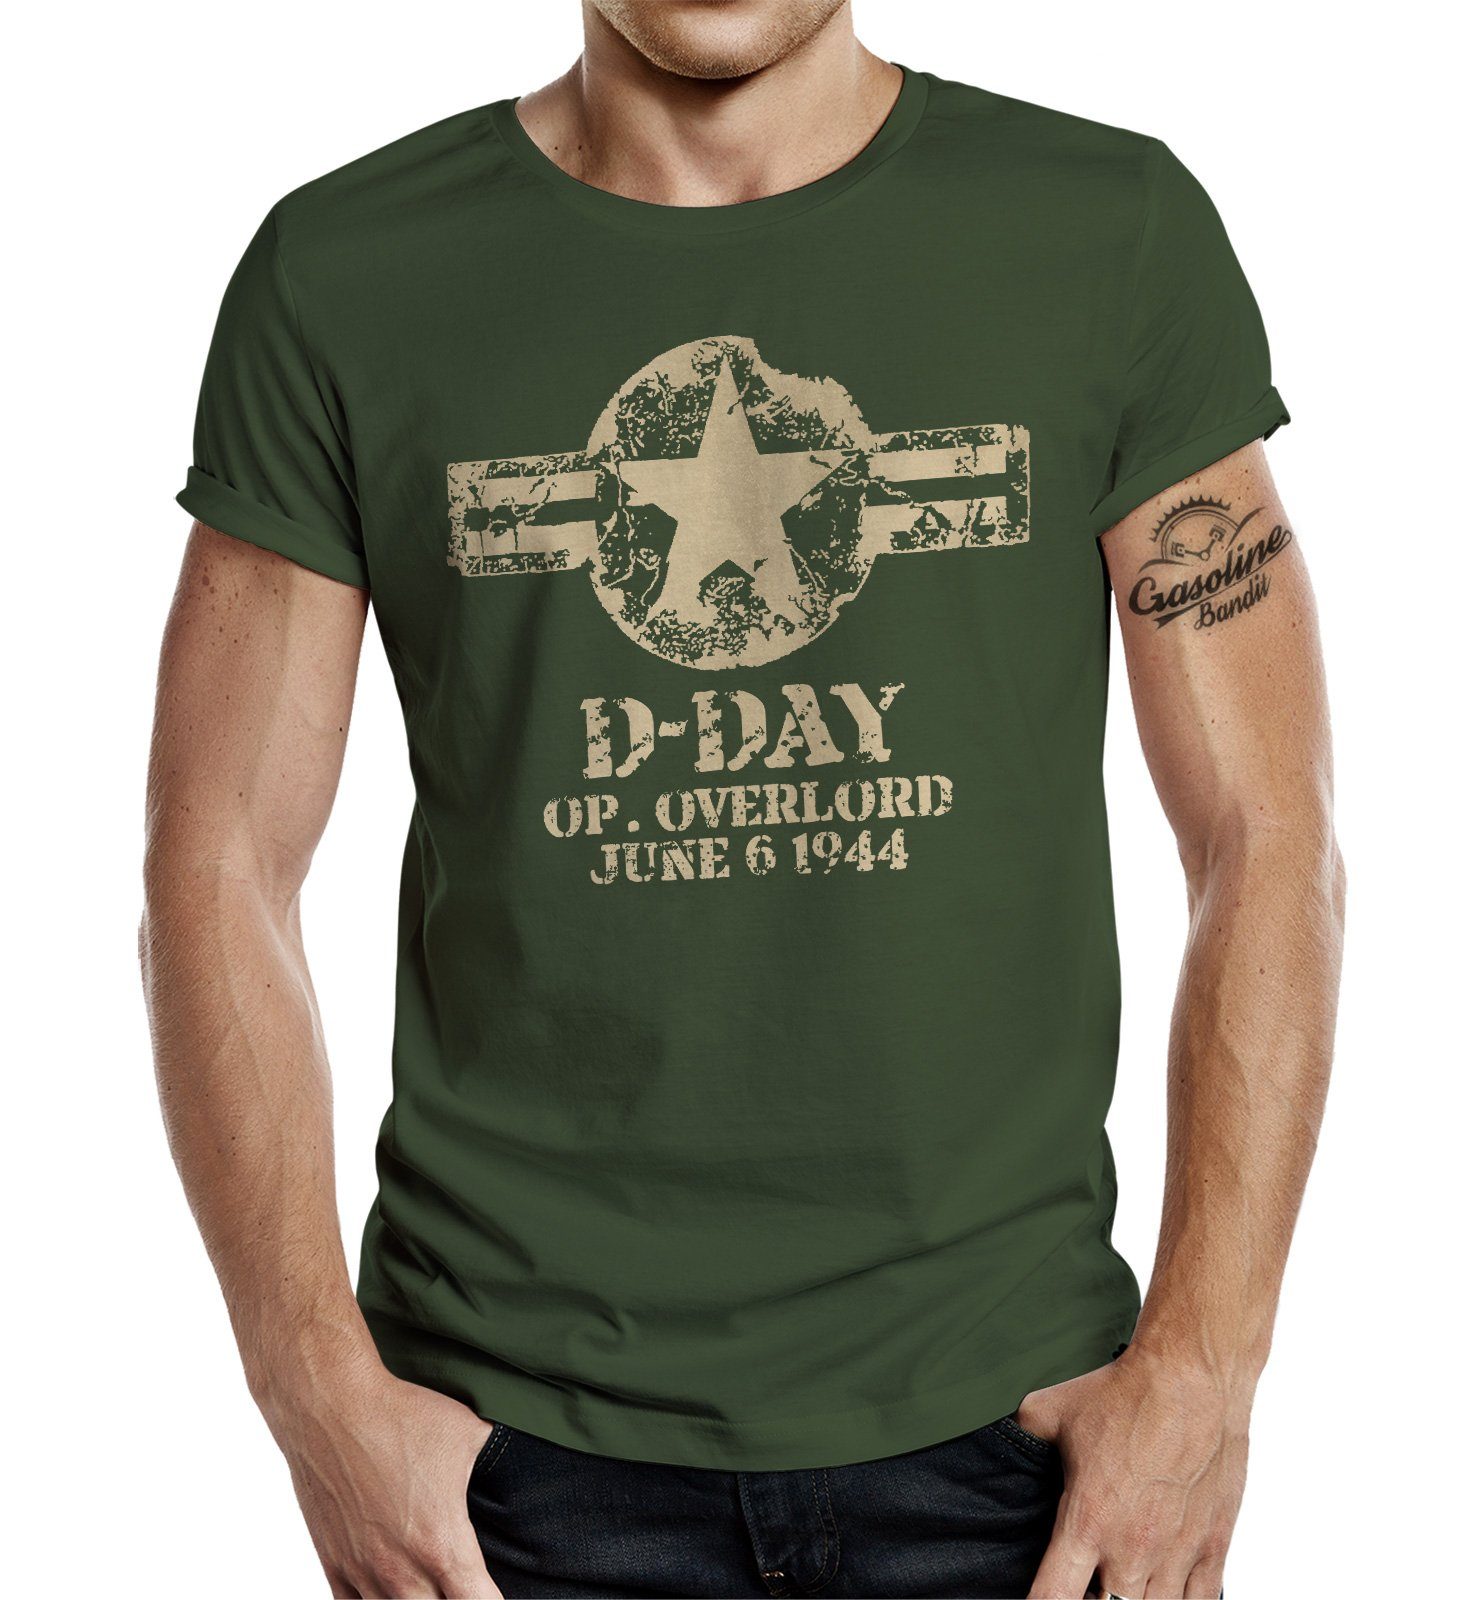 GASOLINE BANDIT® Style: Overlord Operation US-Army D-Day im T-Shirt Vintage